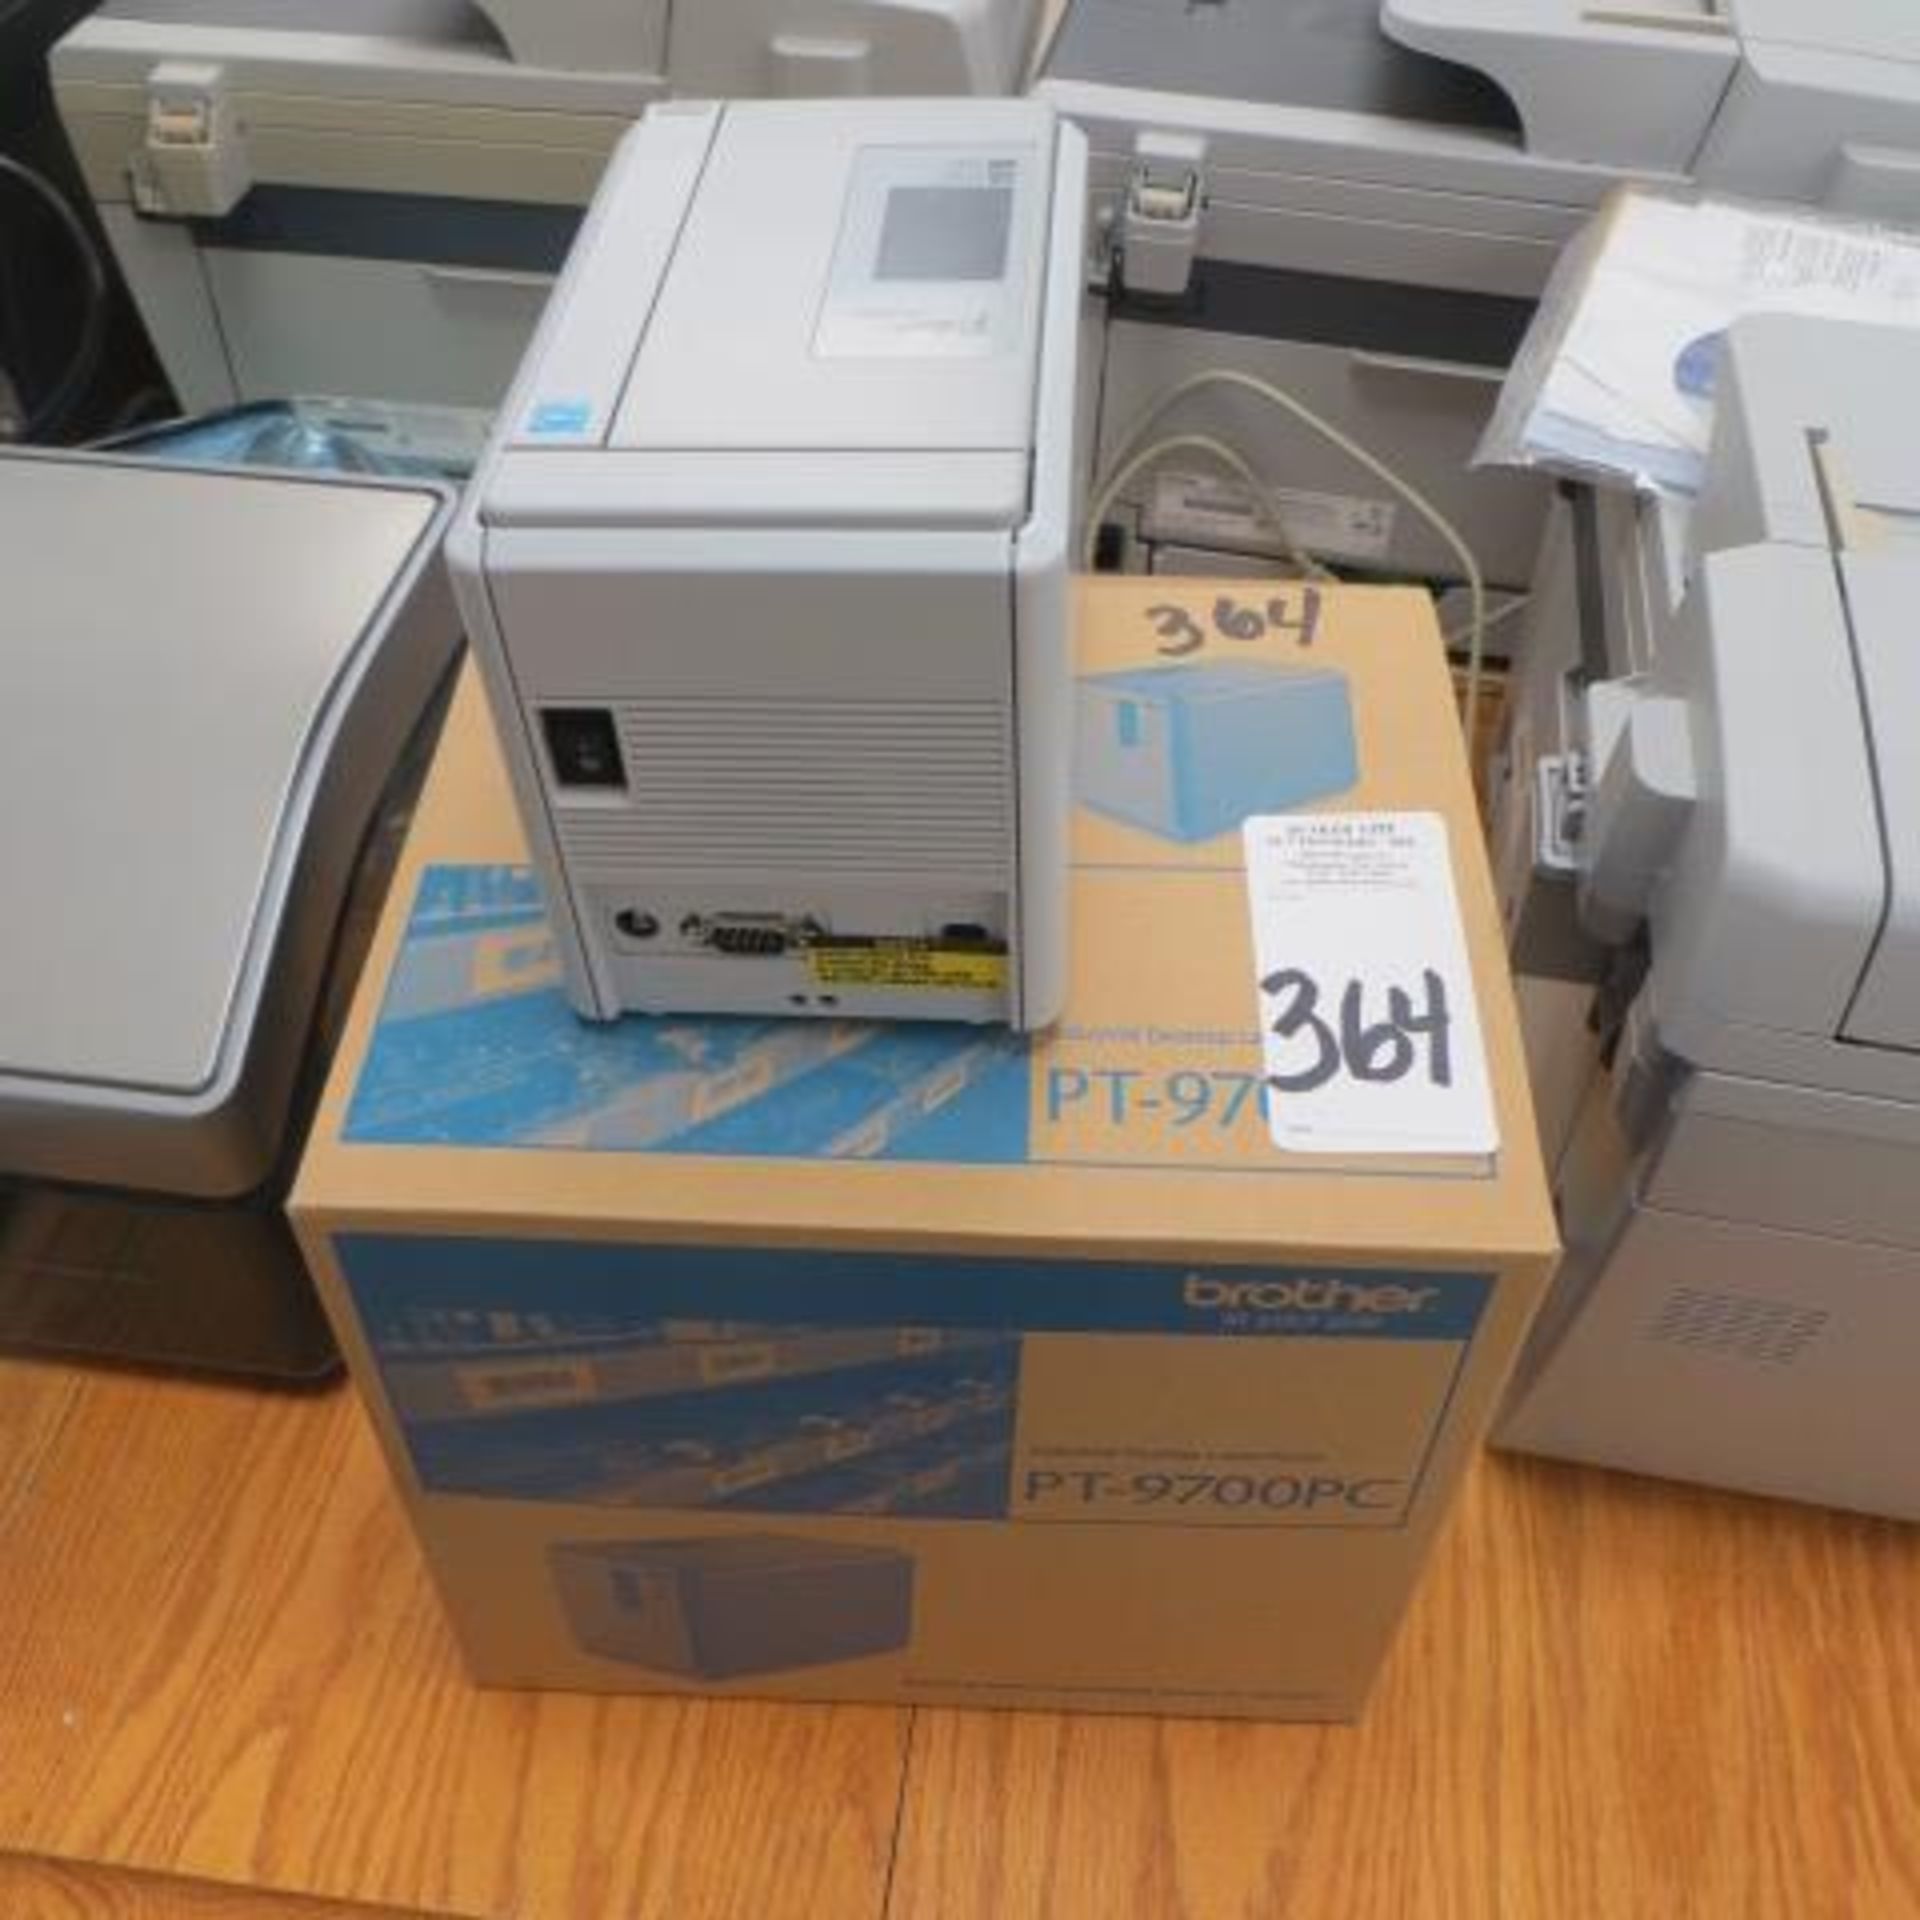 NEW BROTHER P TOUCH 9700PC PRINTER